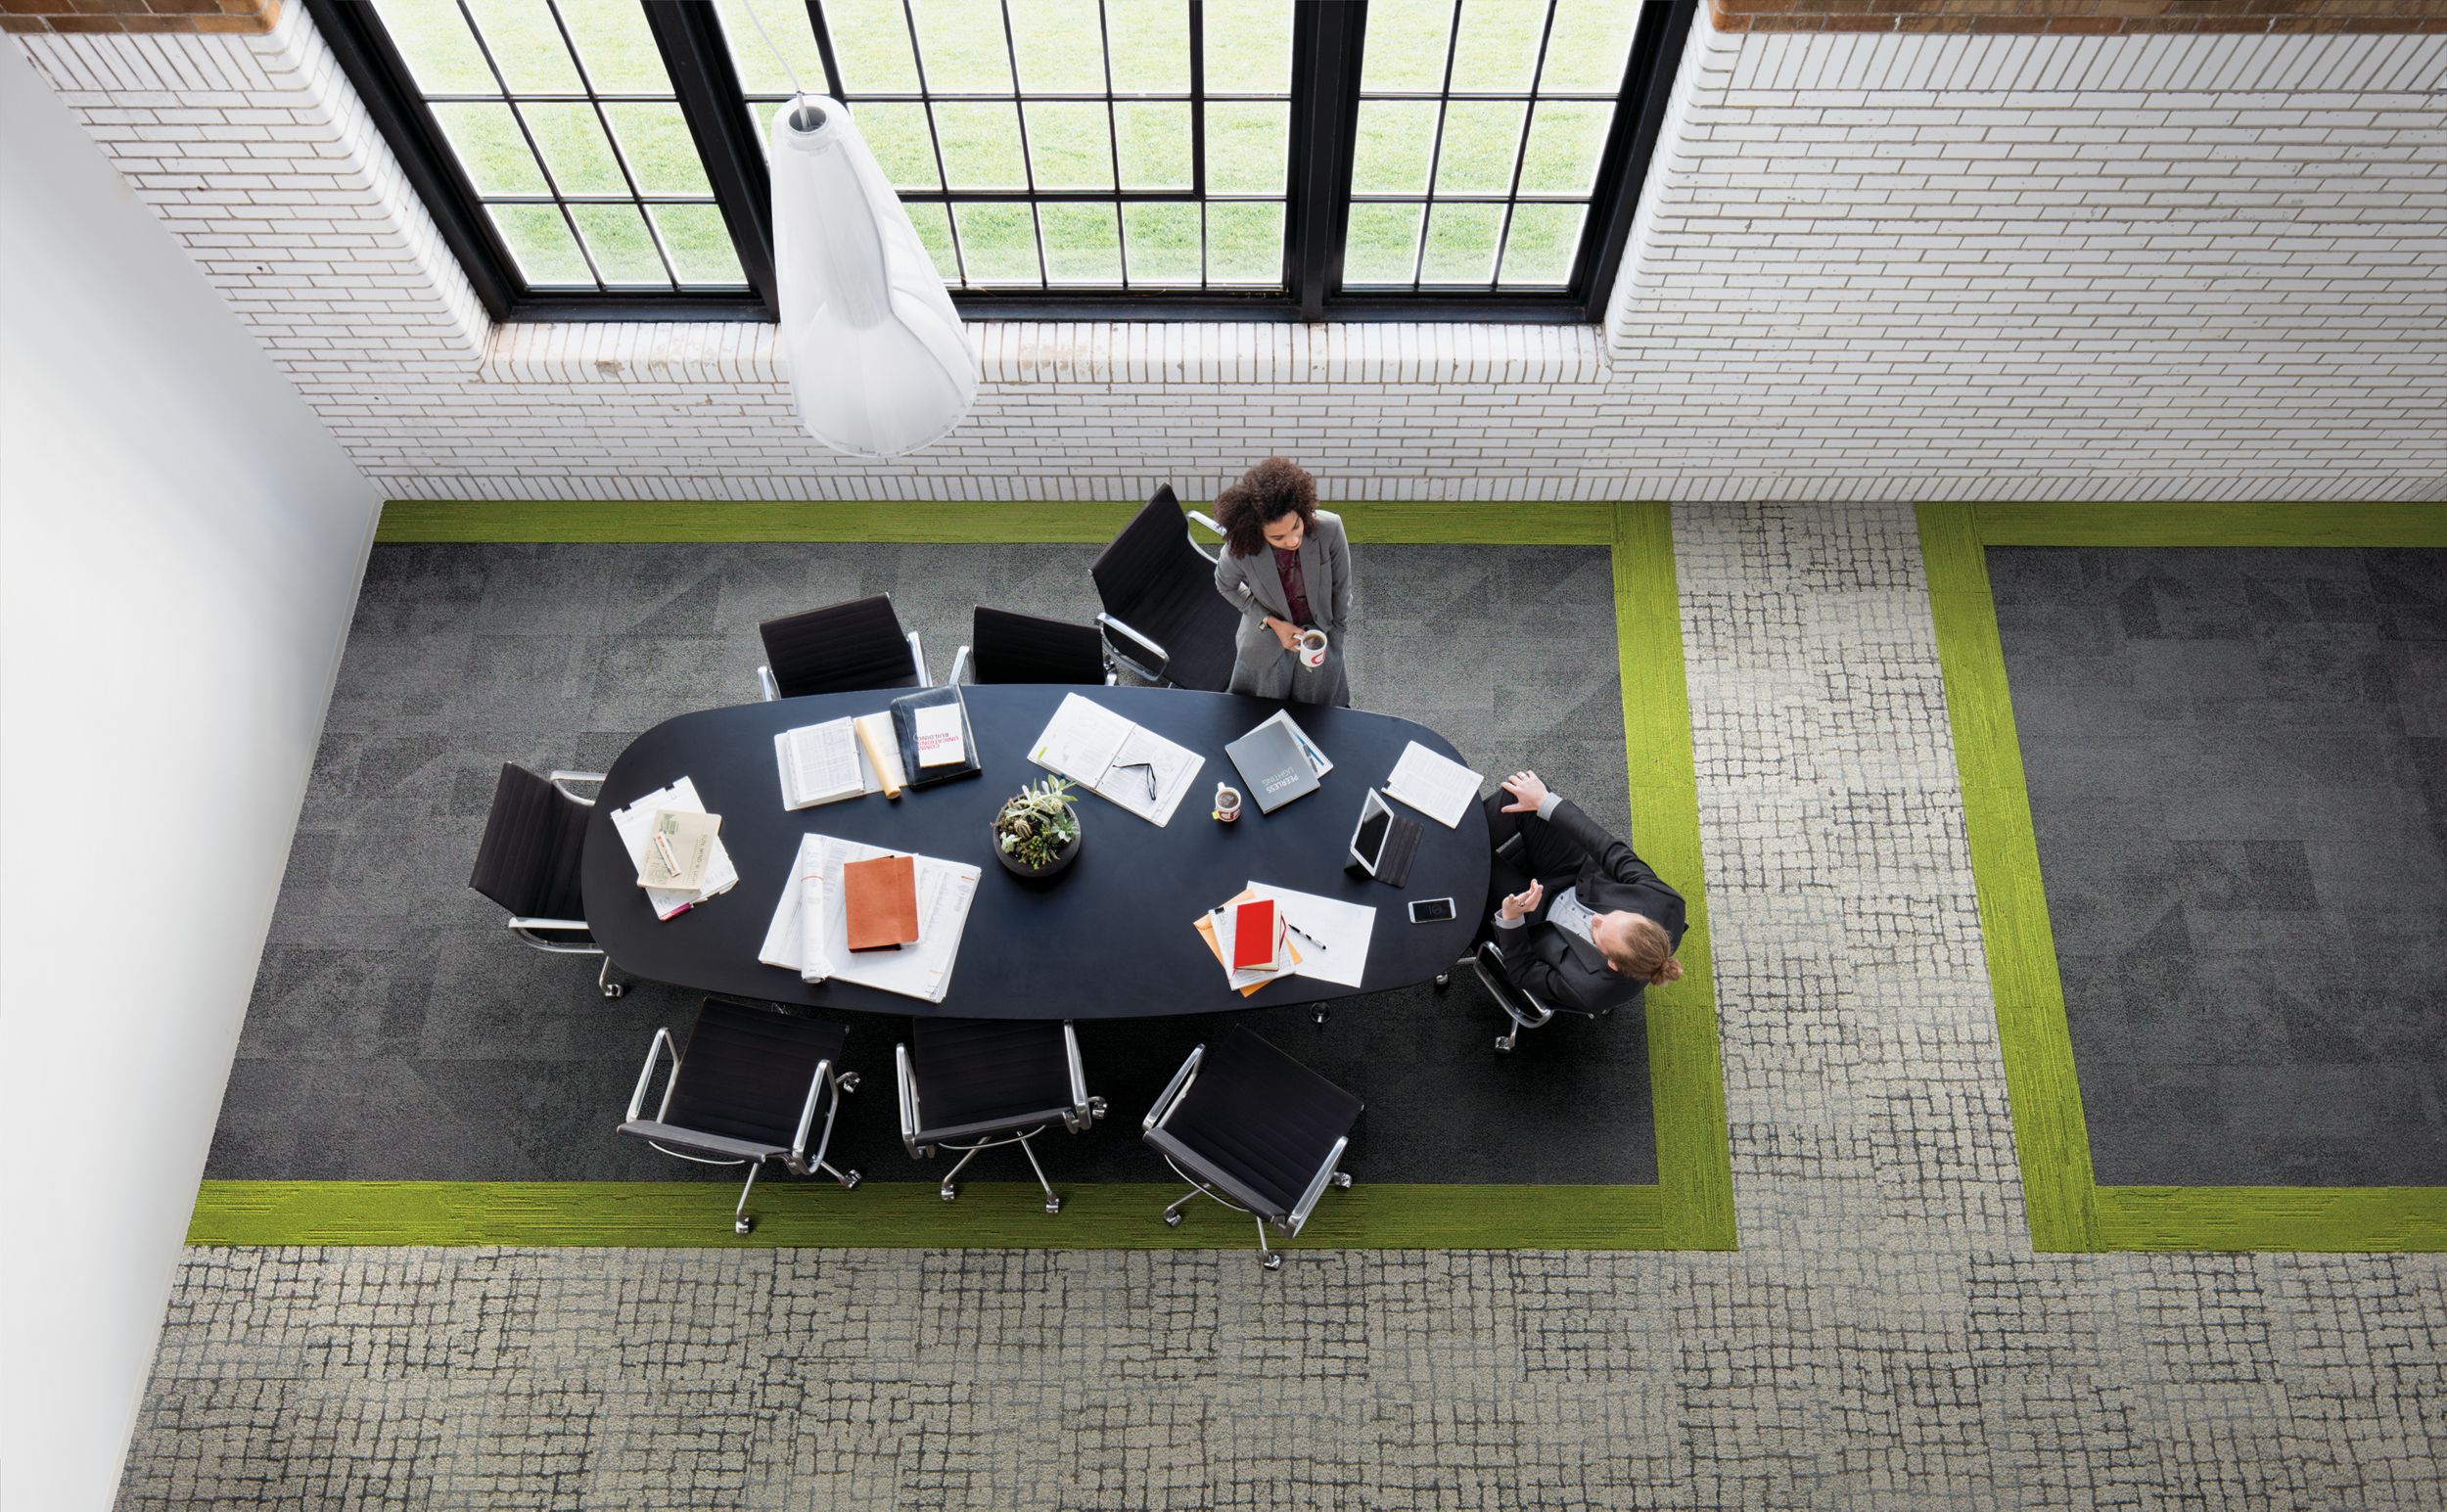 Interface Paver and Sett in Stone carpet tile with UR501 plank carpet tile in overhead view of meeting area with man and women conversating imagen número 3